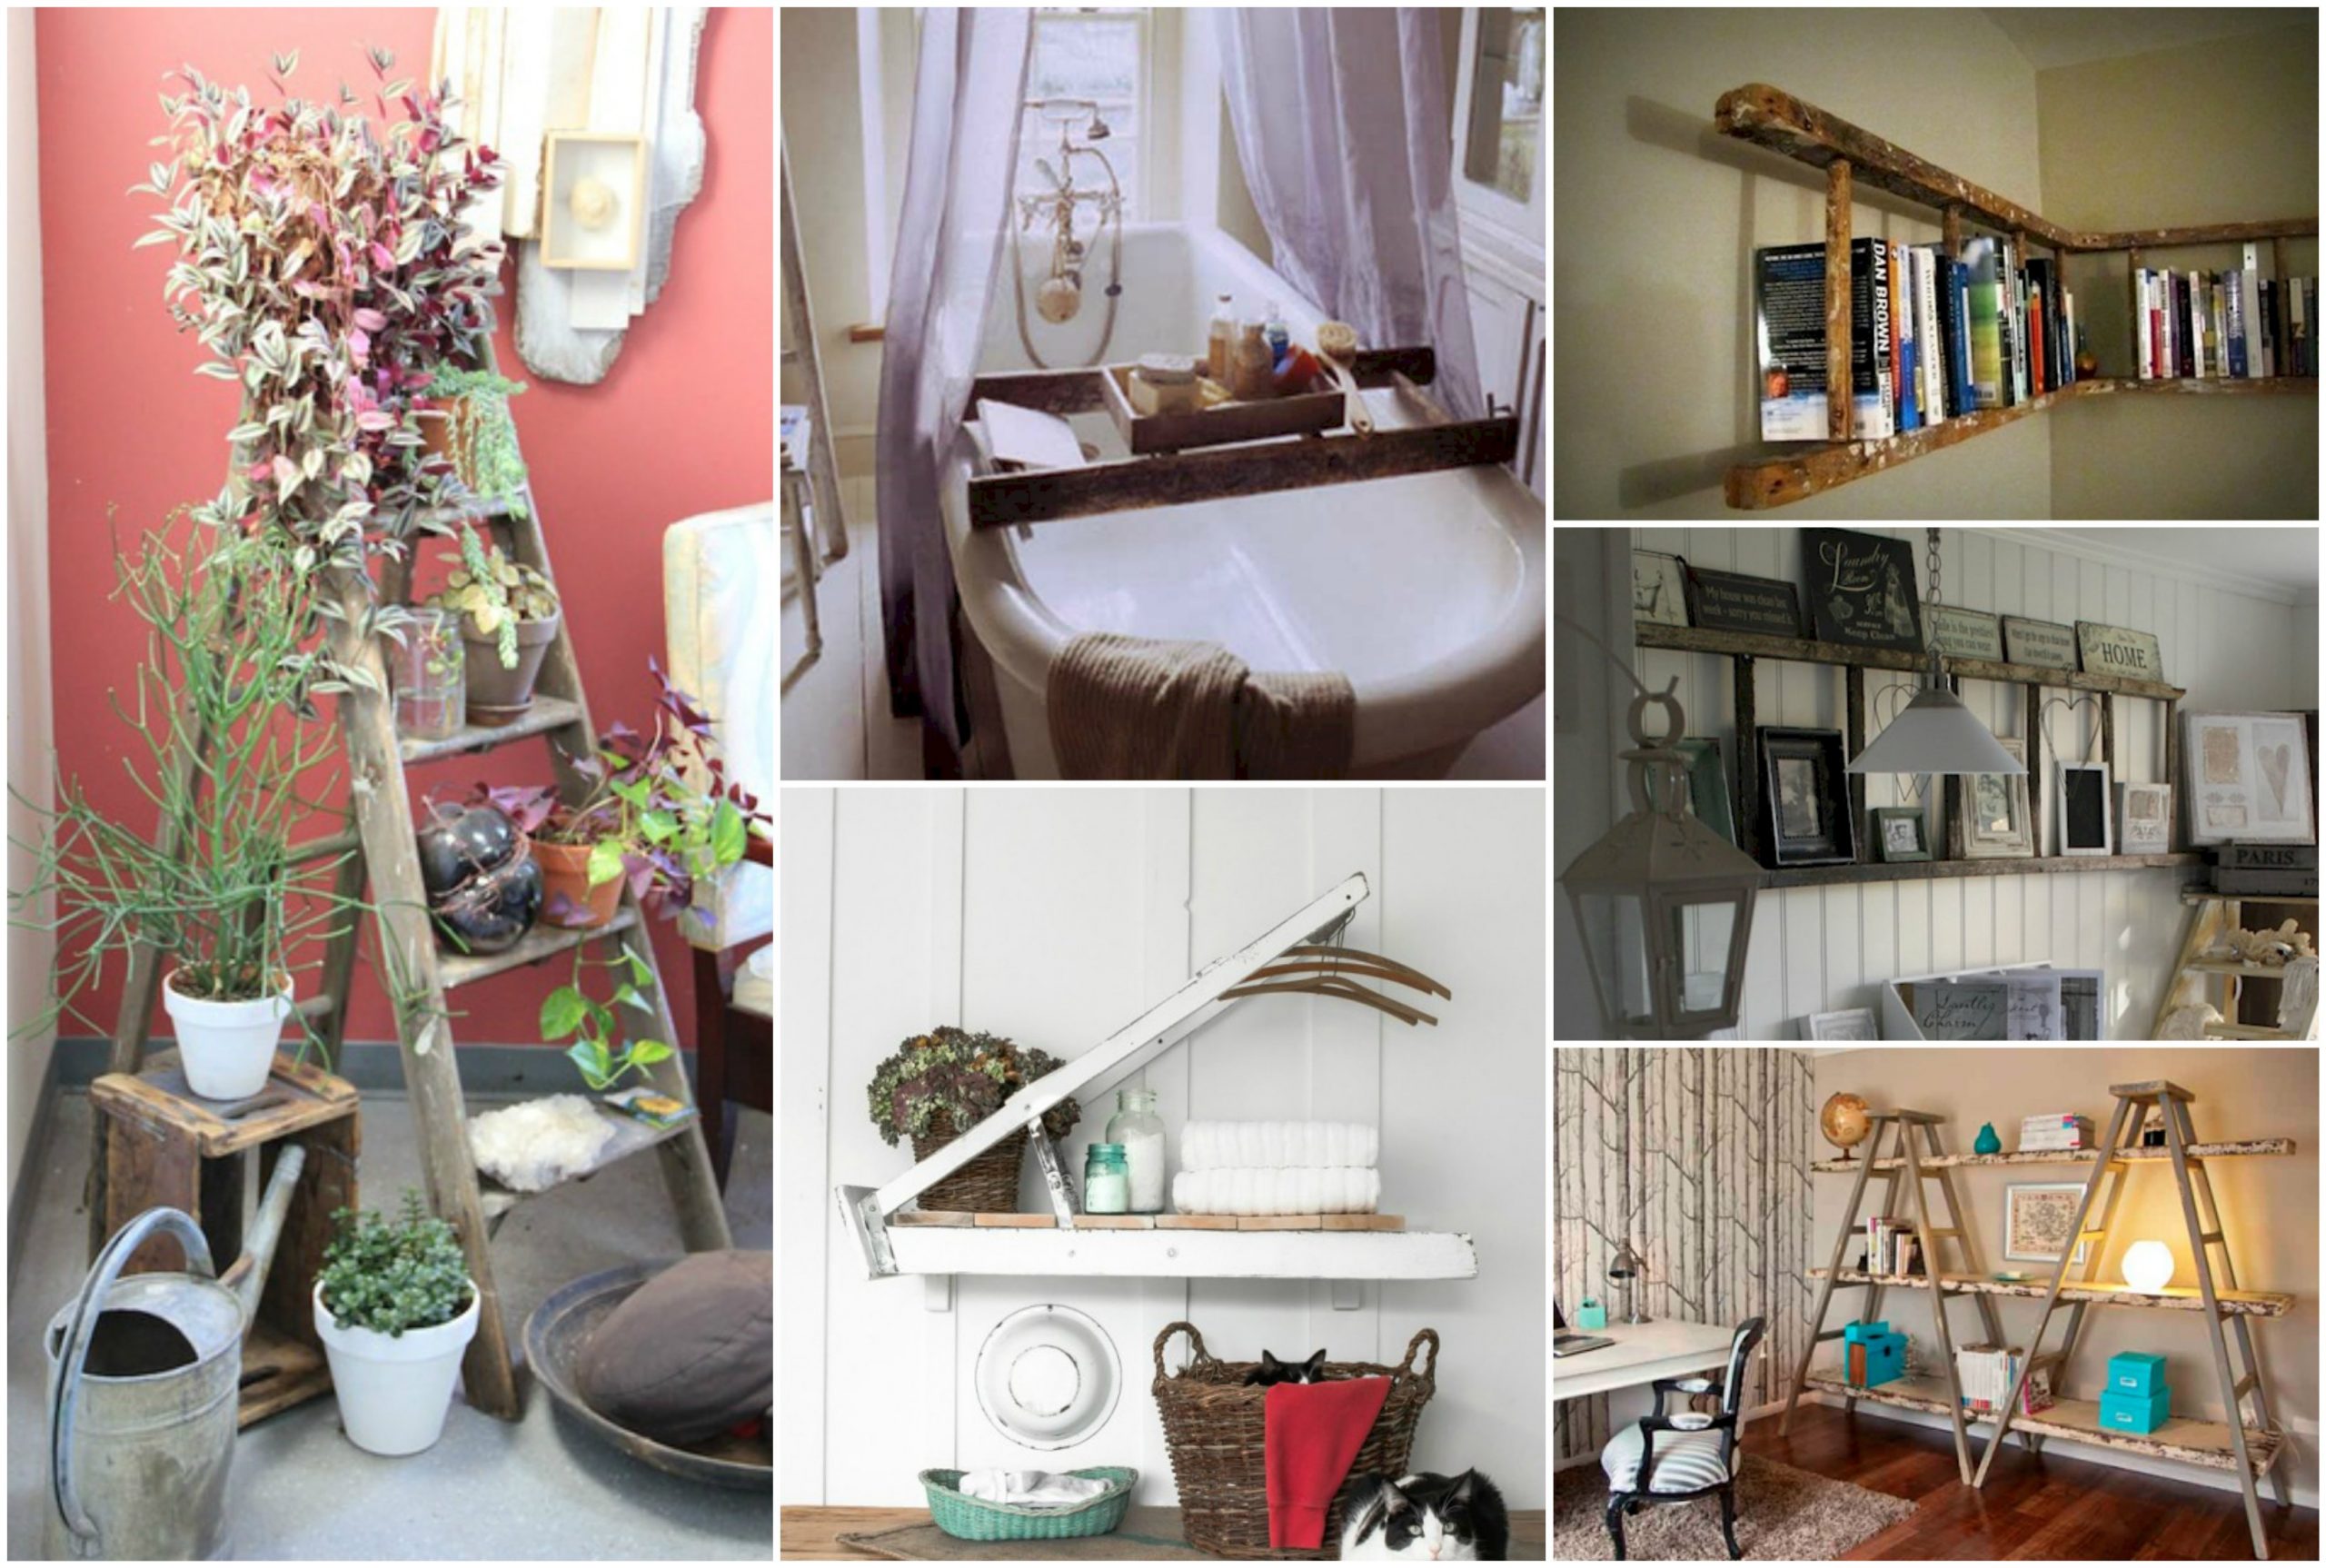 20+ Creative Ways to Use Ladders for Home Decor